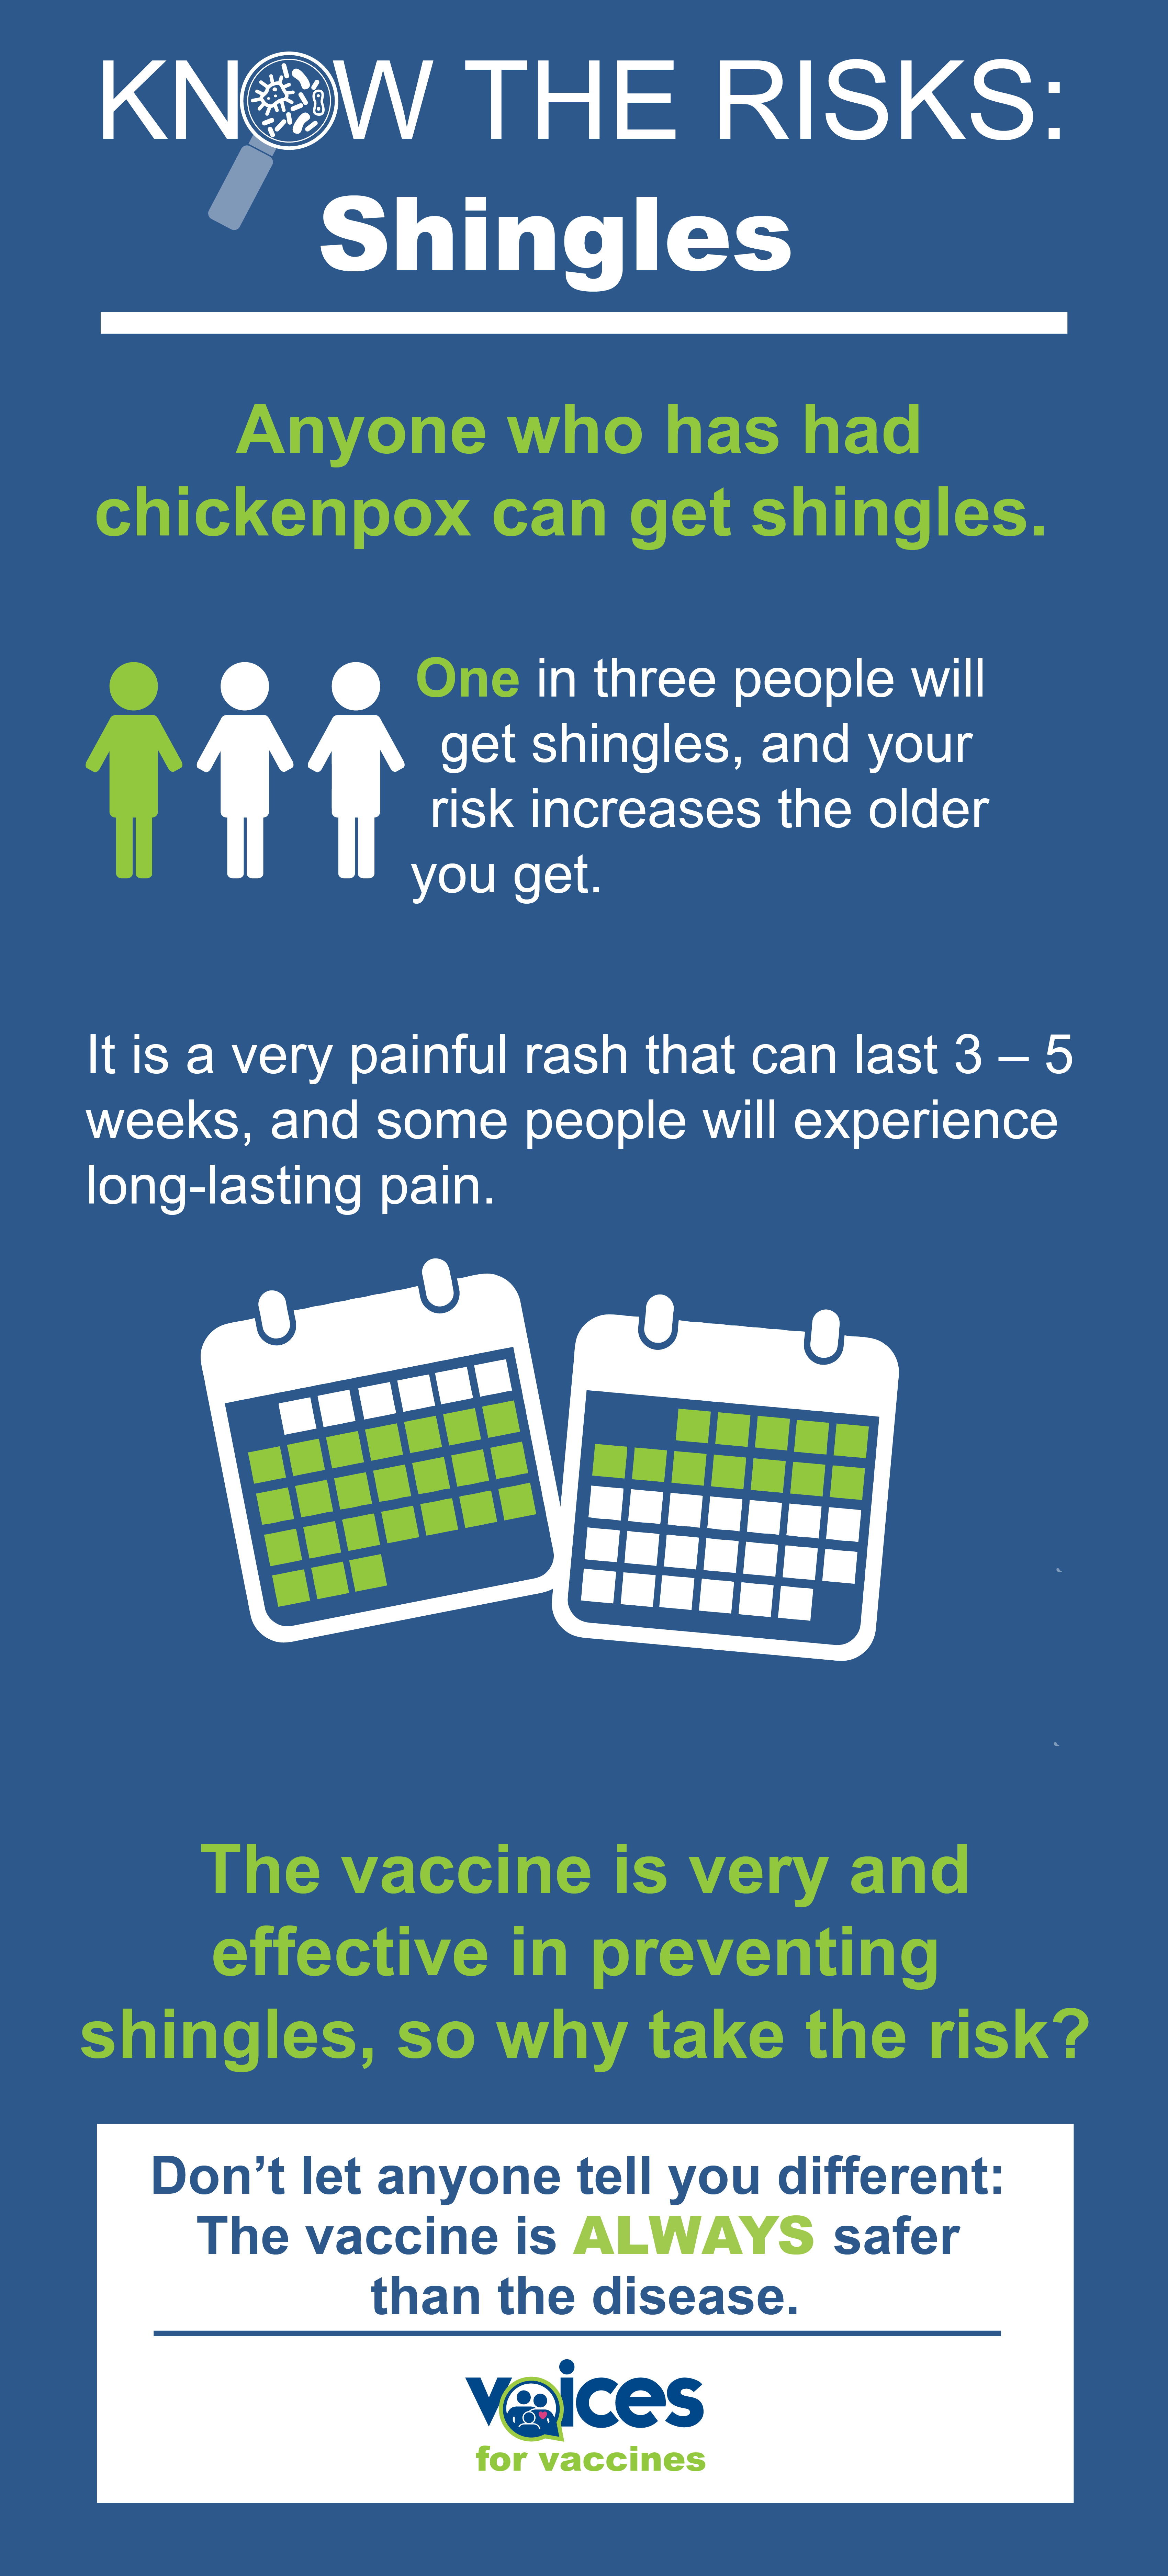 One in three people will get shingles, and your risk increases the older you get. It is a very painful rash that can last 3 – 5 weeks, and some people will experience long-lasting pain. The vaccine is very and effective in preventing shingles, so why take the risk? Don’t let anyone tell you different – the vaccine is ALWAYS safer than the disease.